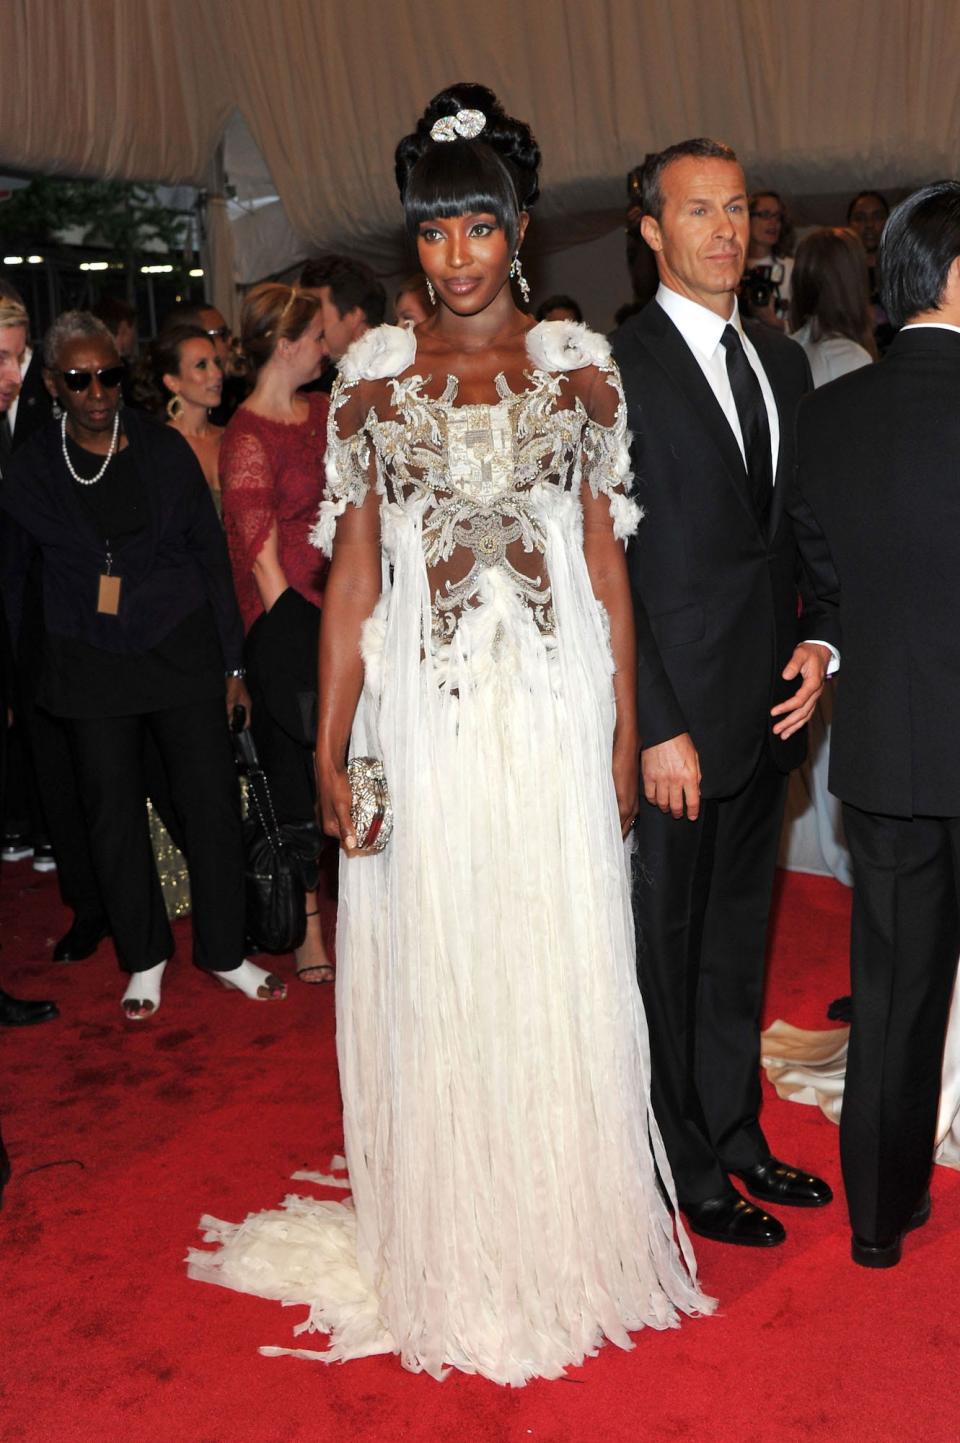 Naomi Campbell stands on the red carpet at the 2011 Met Gala wearing a flowing white dress decorated with a crest and silver detailing on the chest.